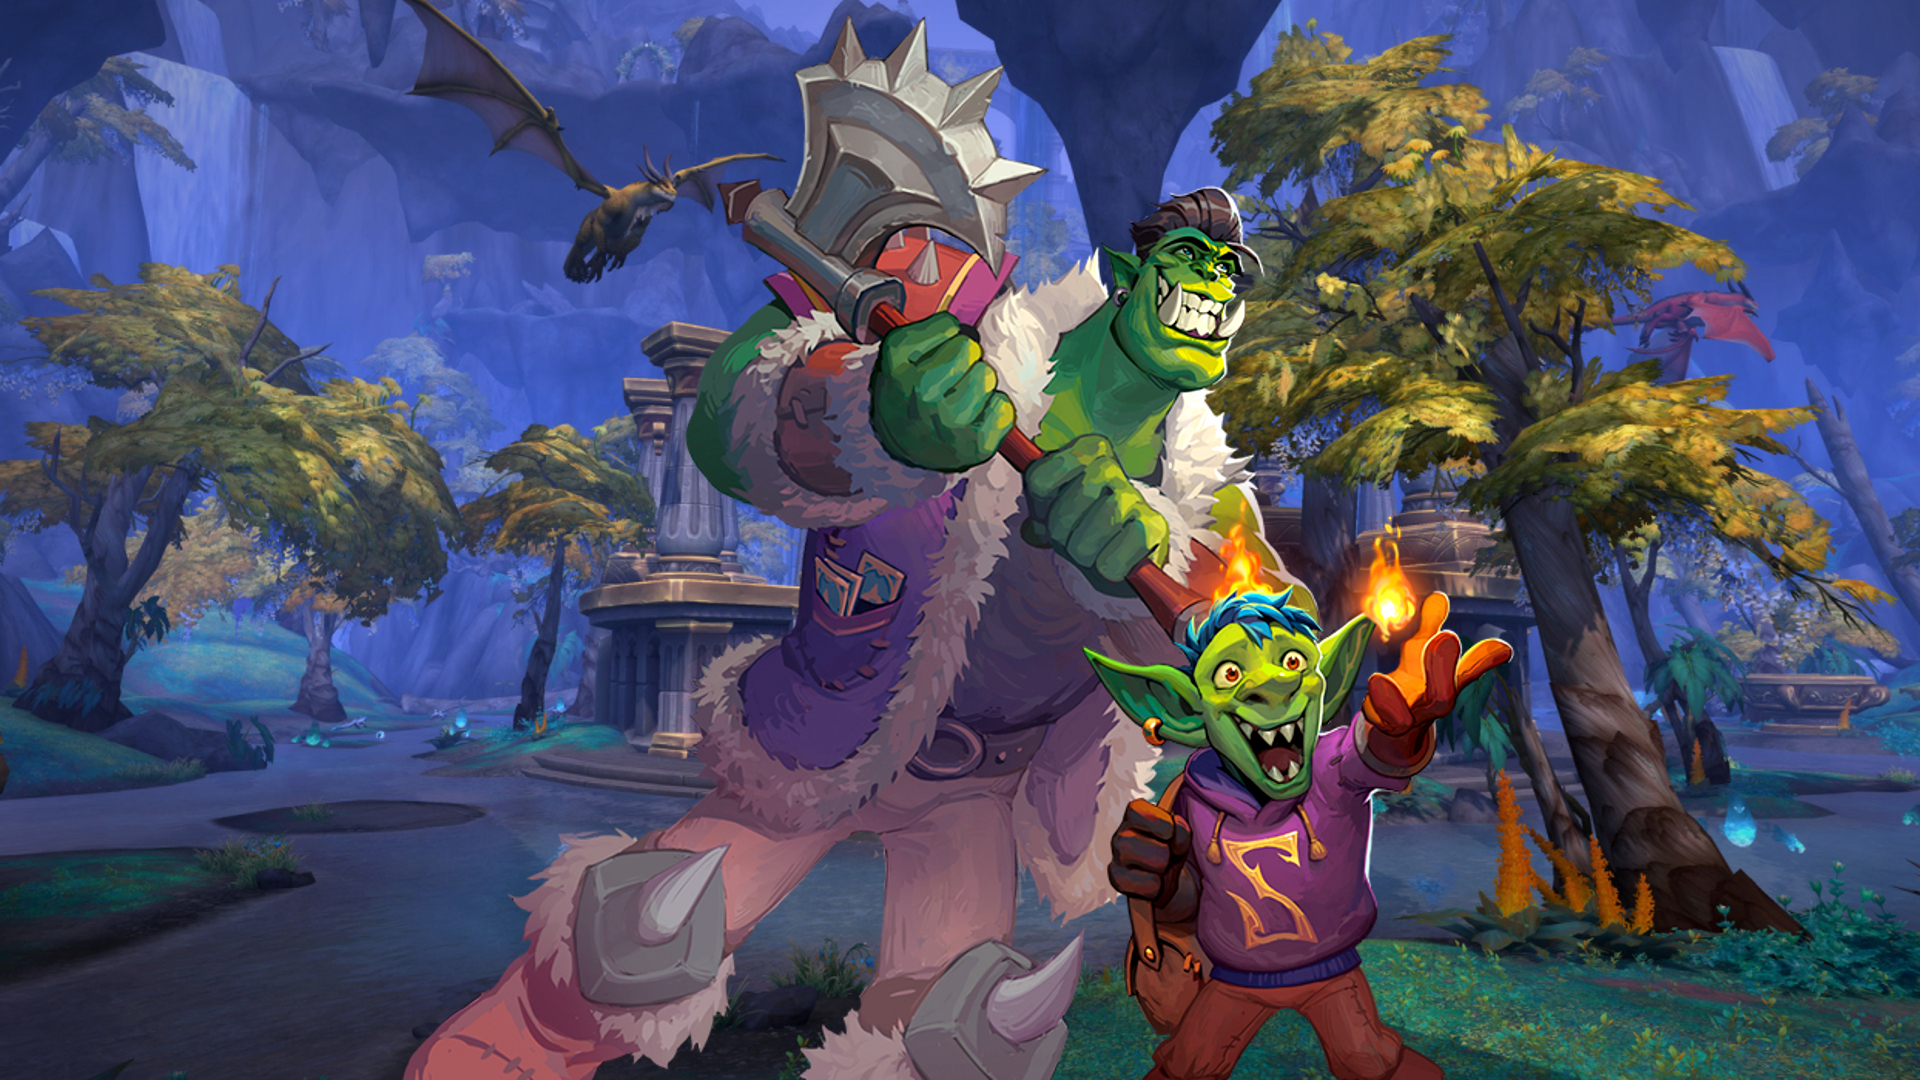 WoW Dragonflight Hearthstone quest finally unites MMO and card game